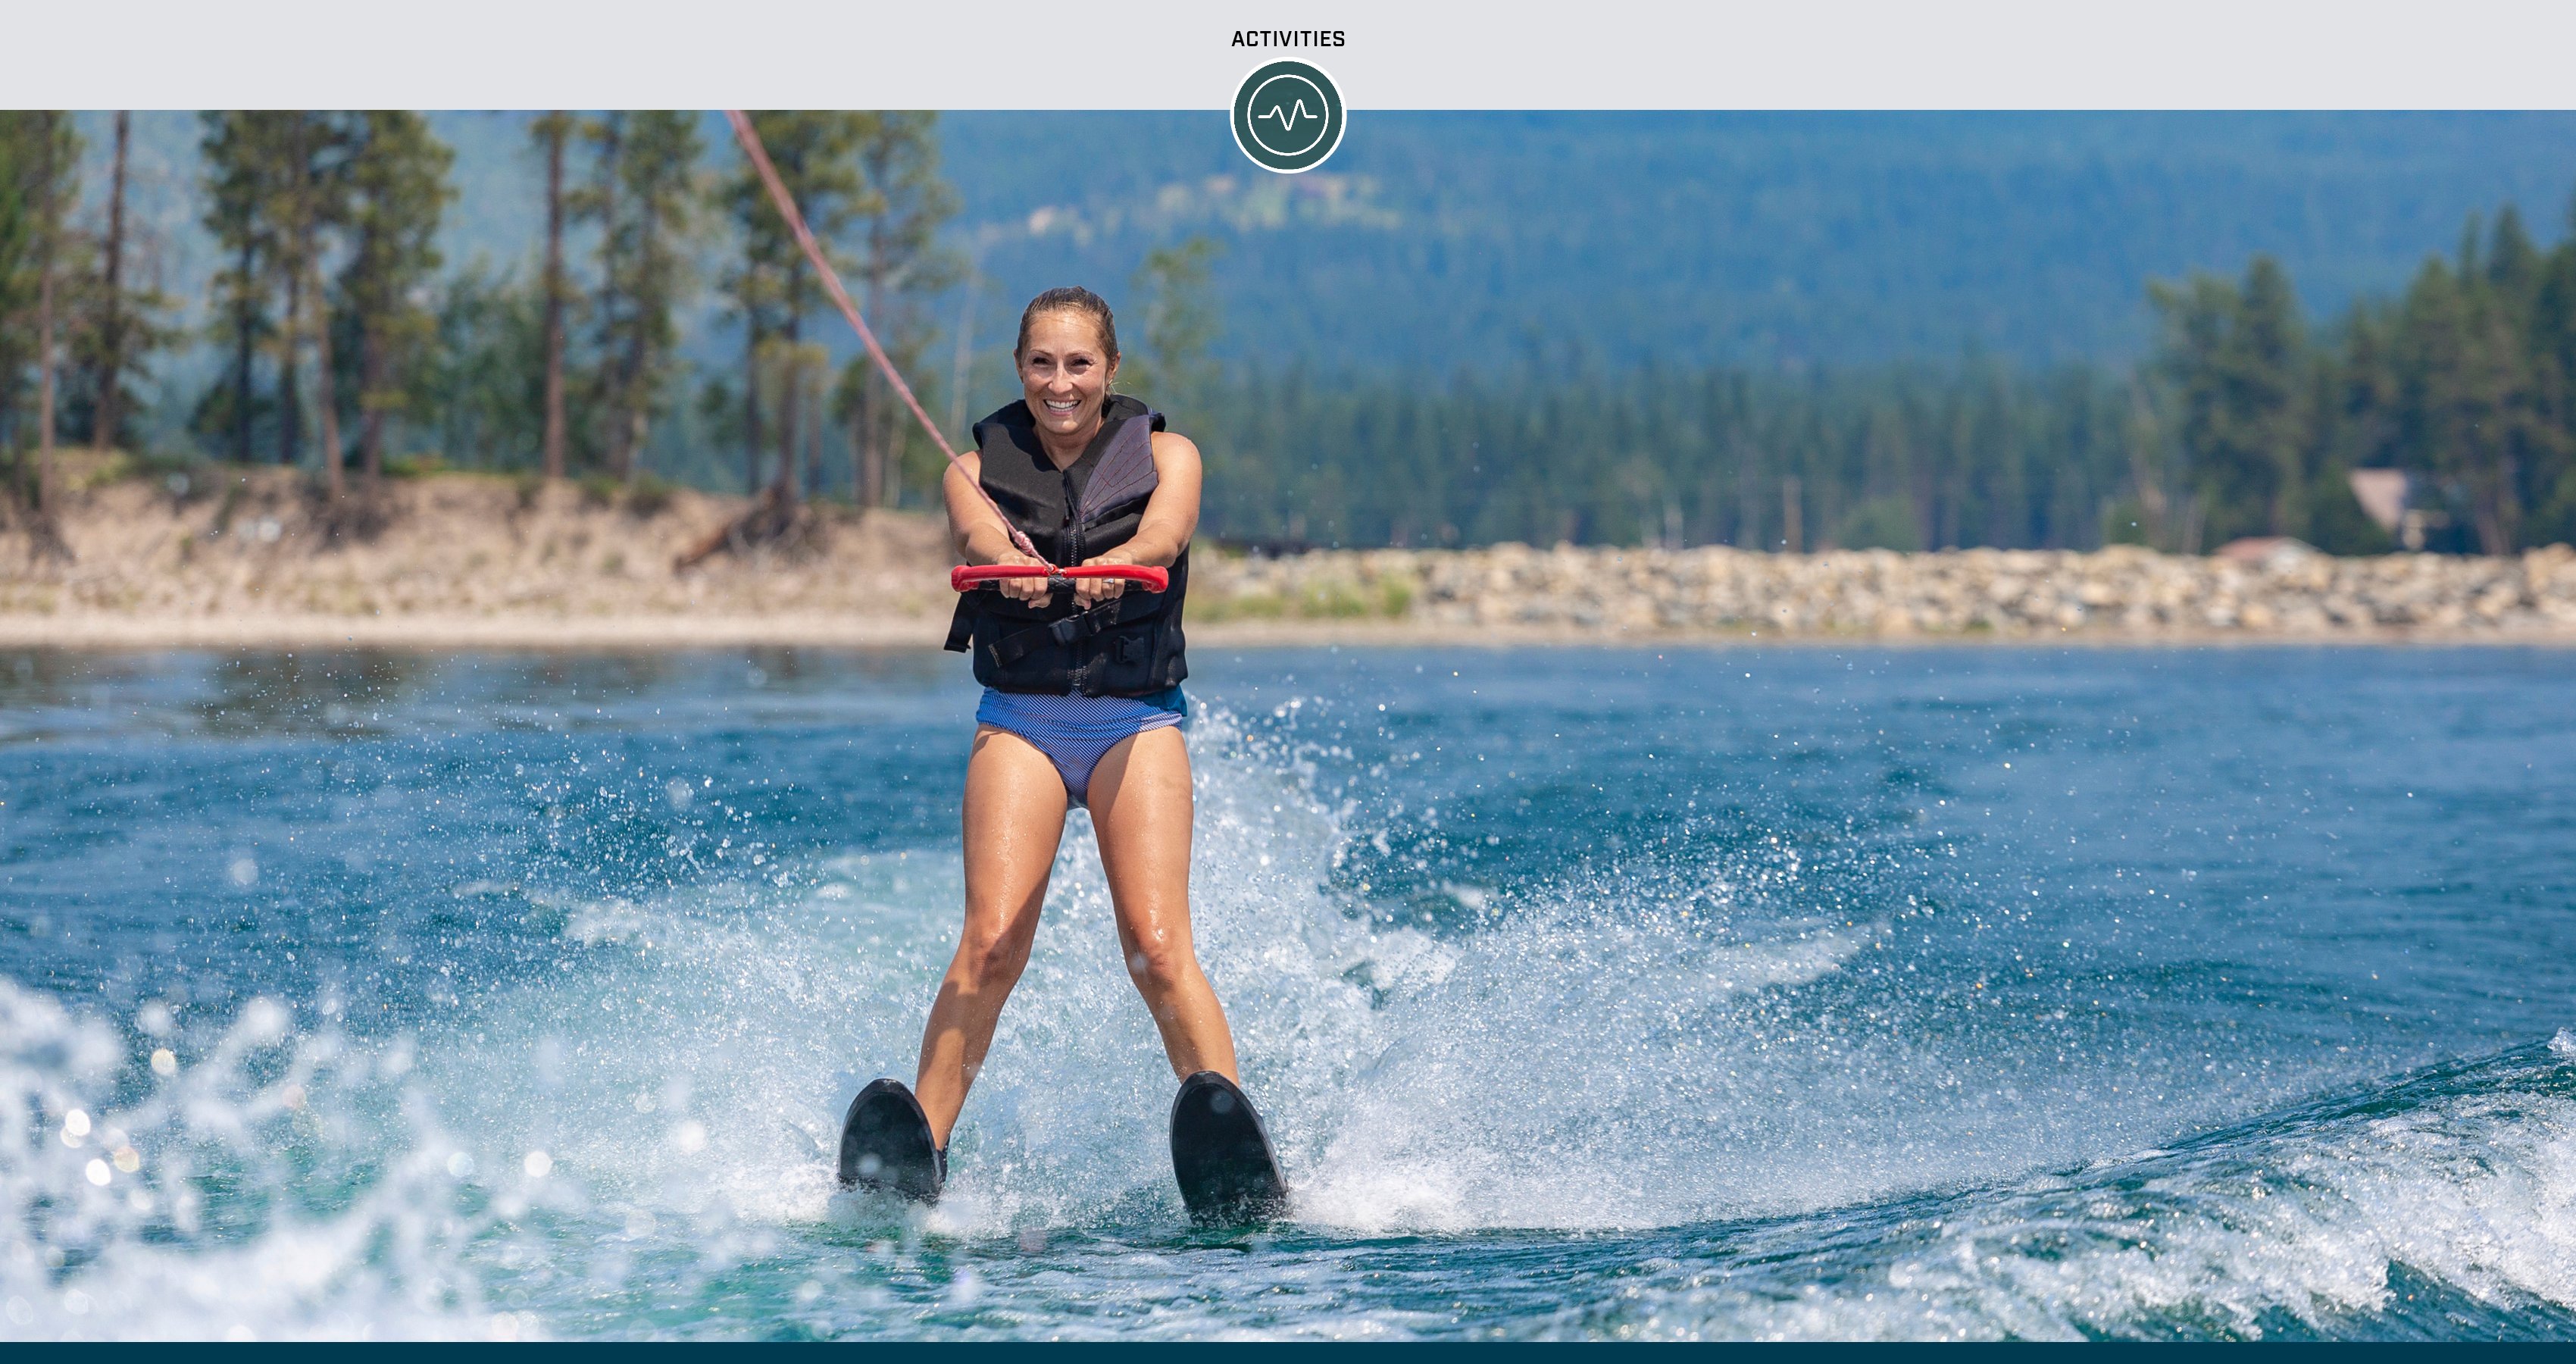 Waterskiing Do’s and Don’ts